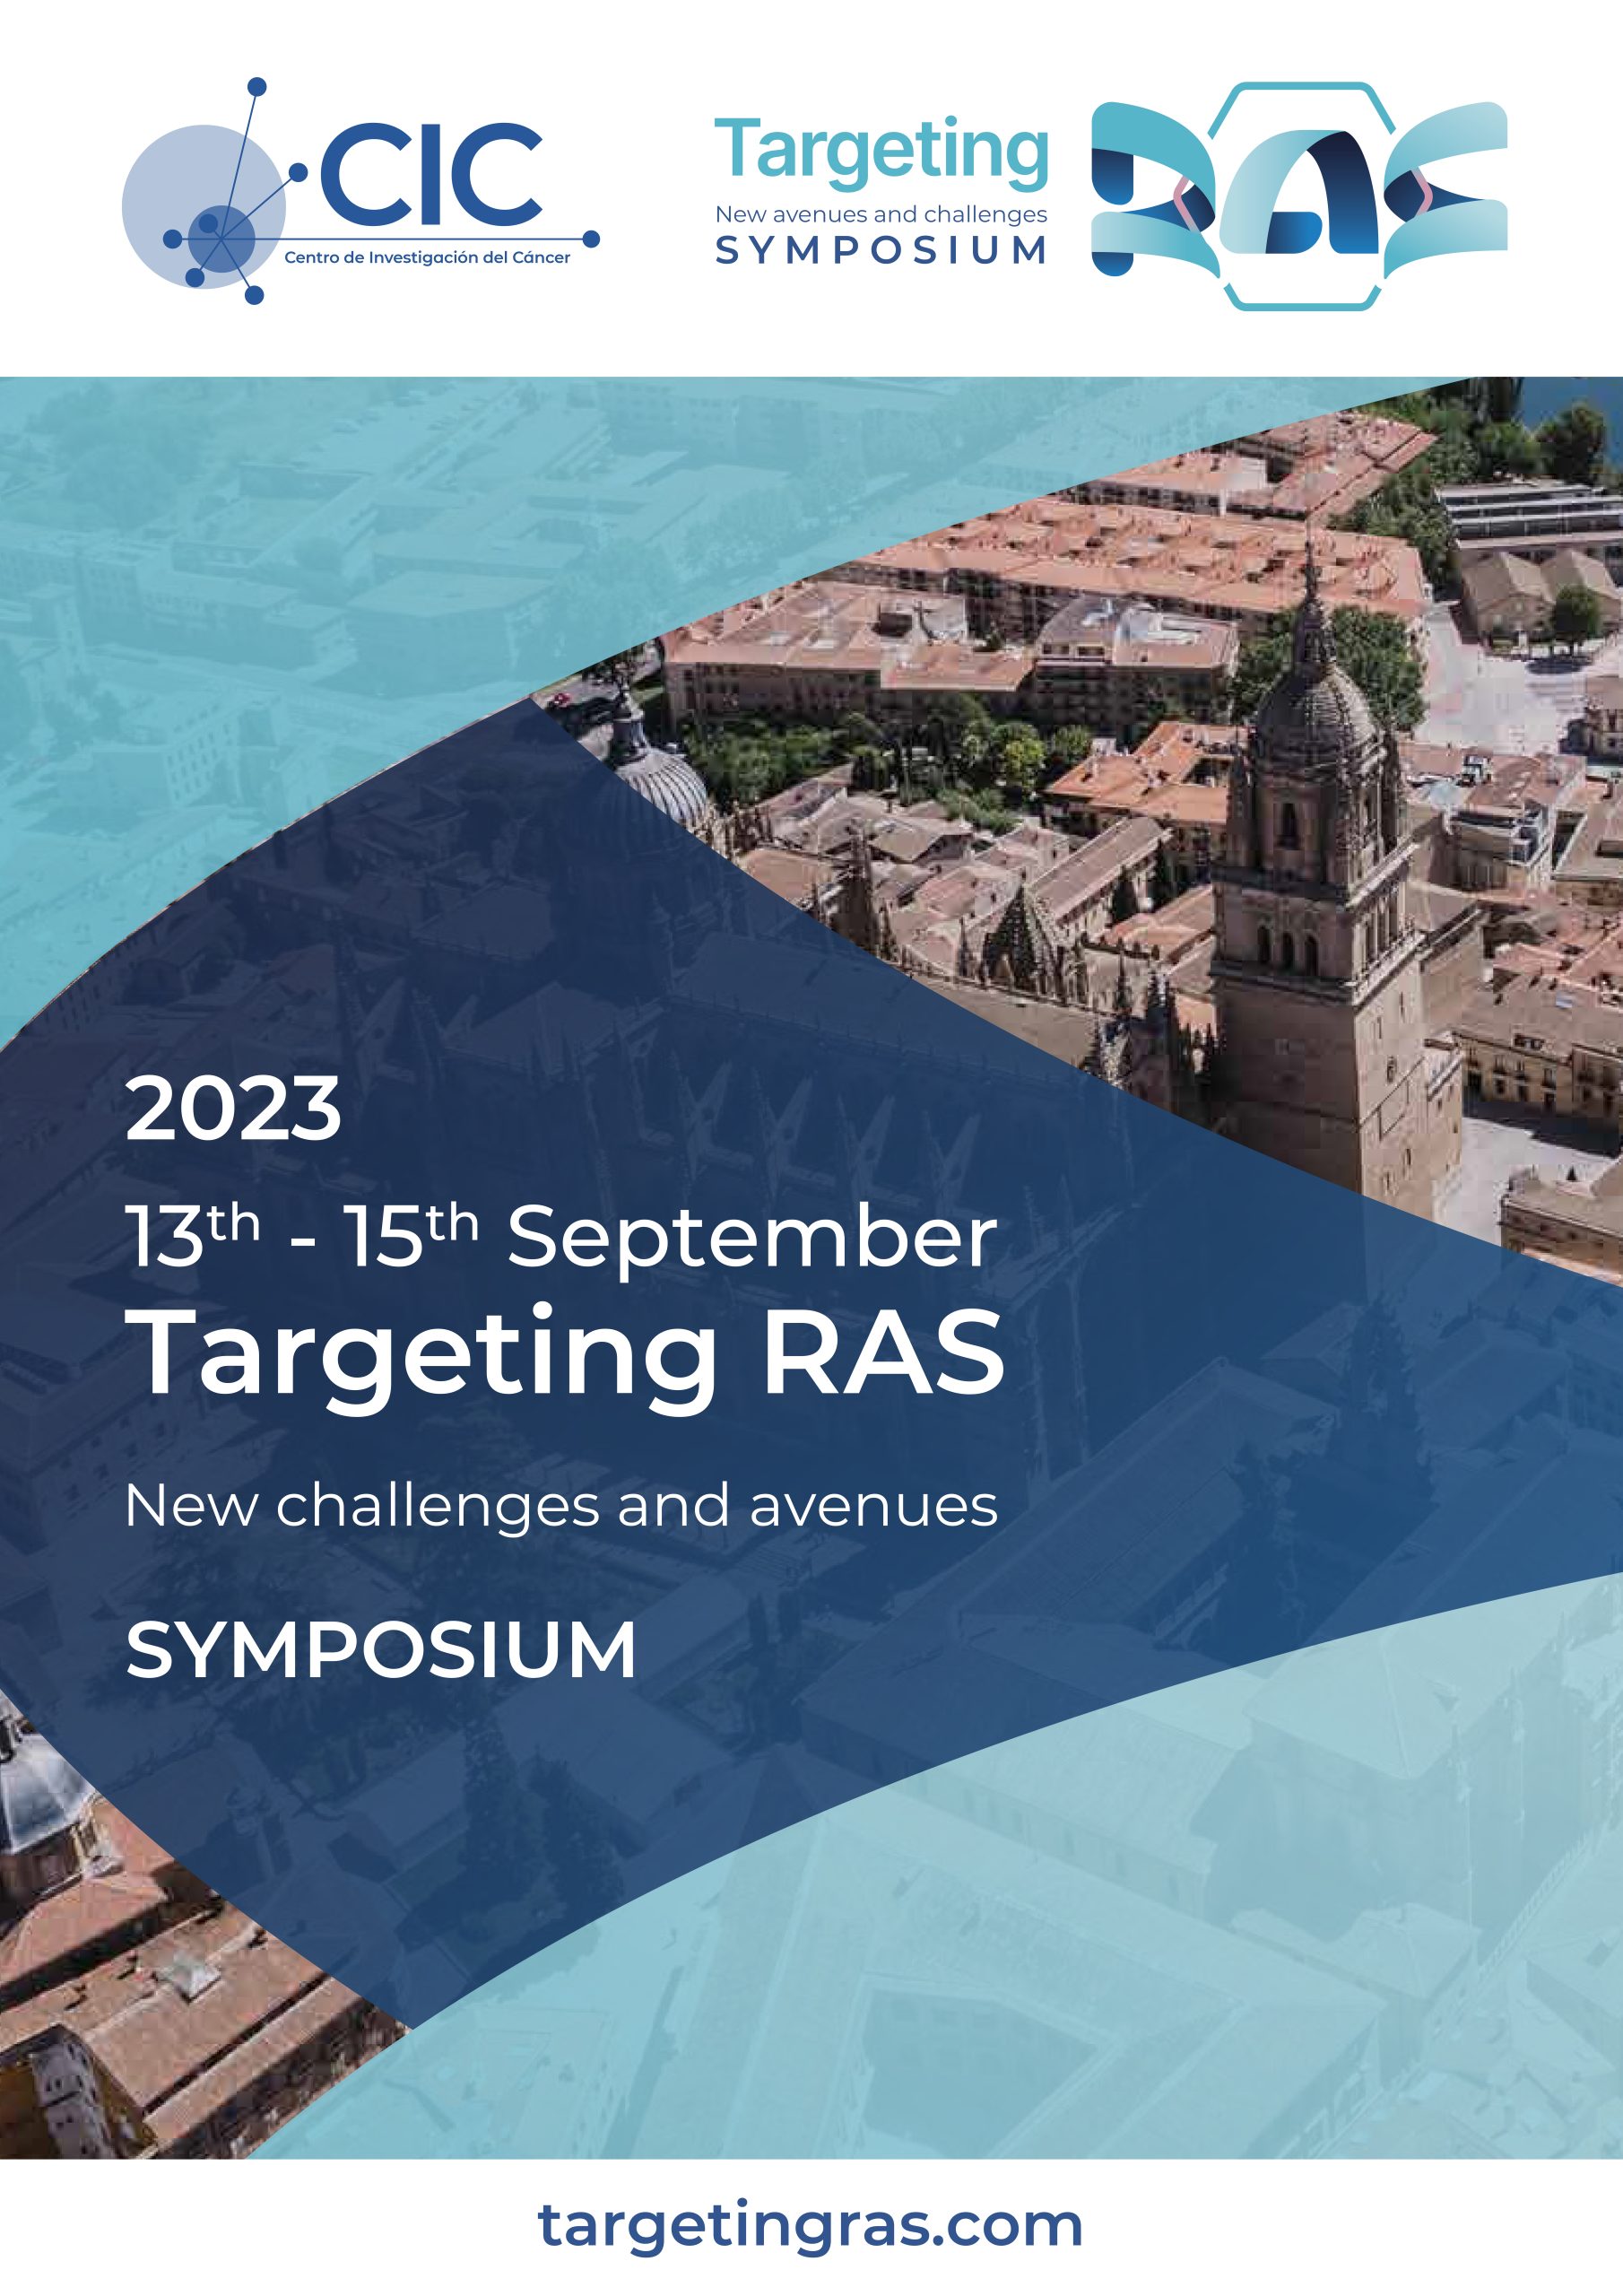 Targeting RAS: new avenues and challenges.